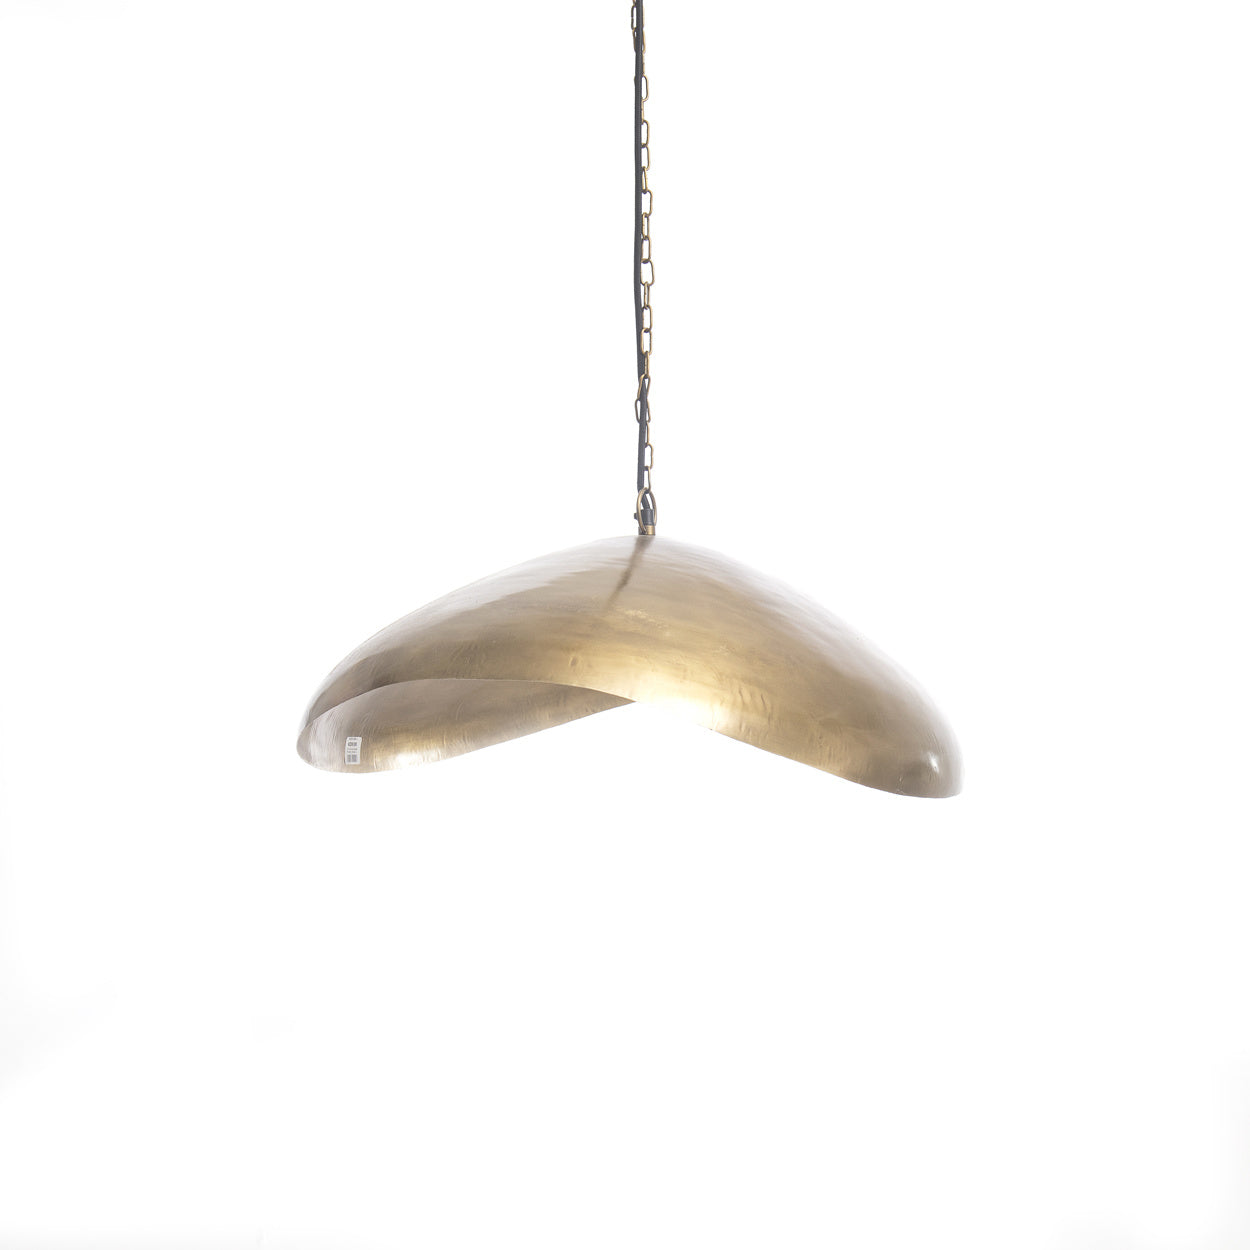 THE FORTUNE COOKIE Pendant Lamp